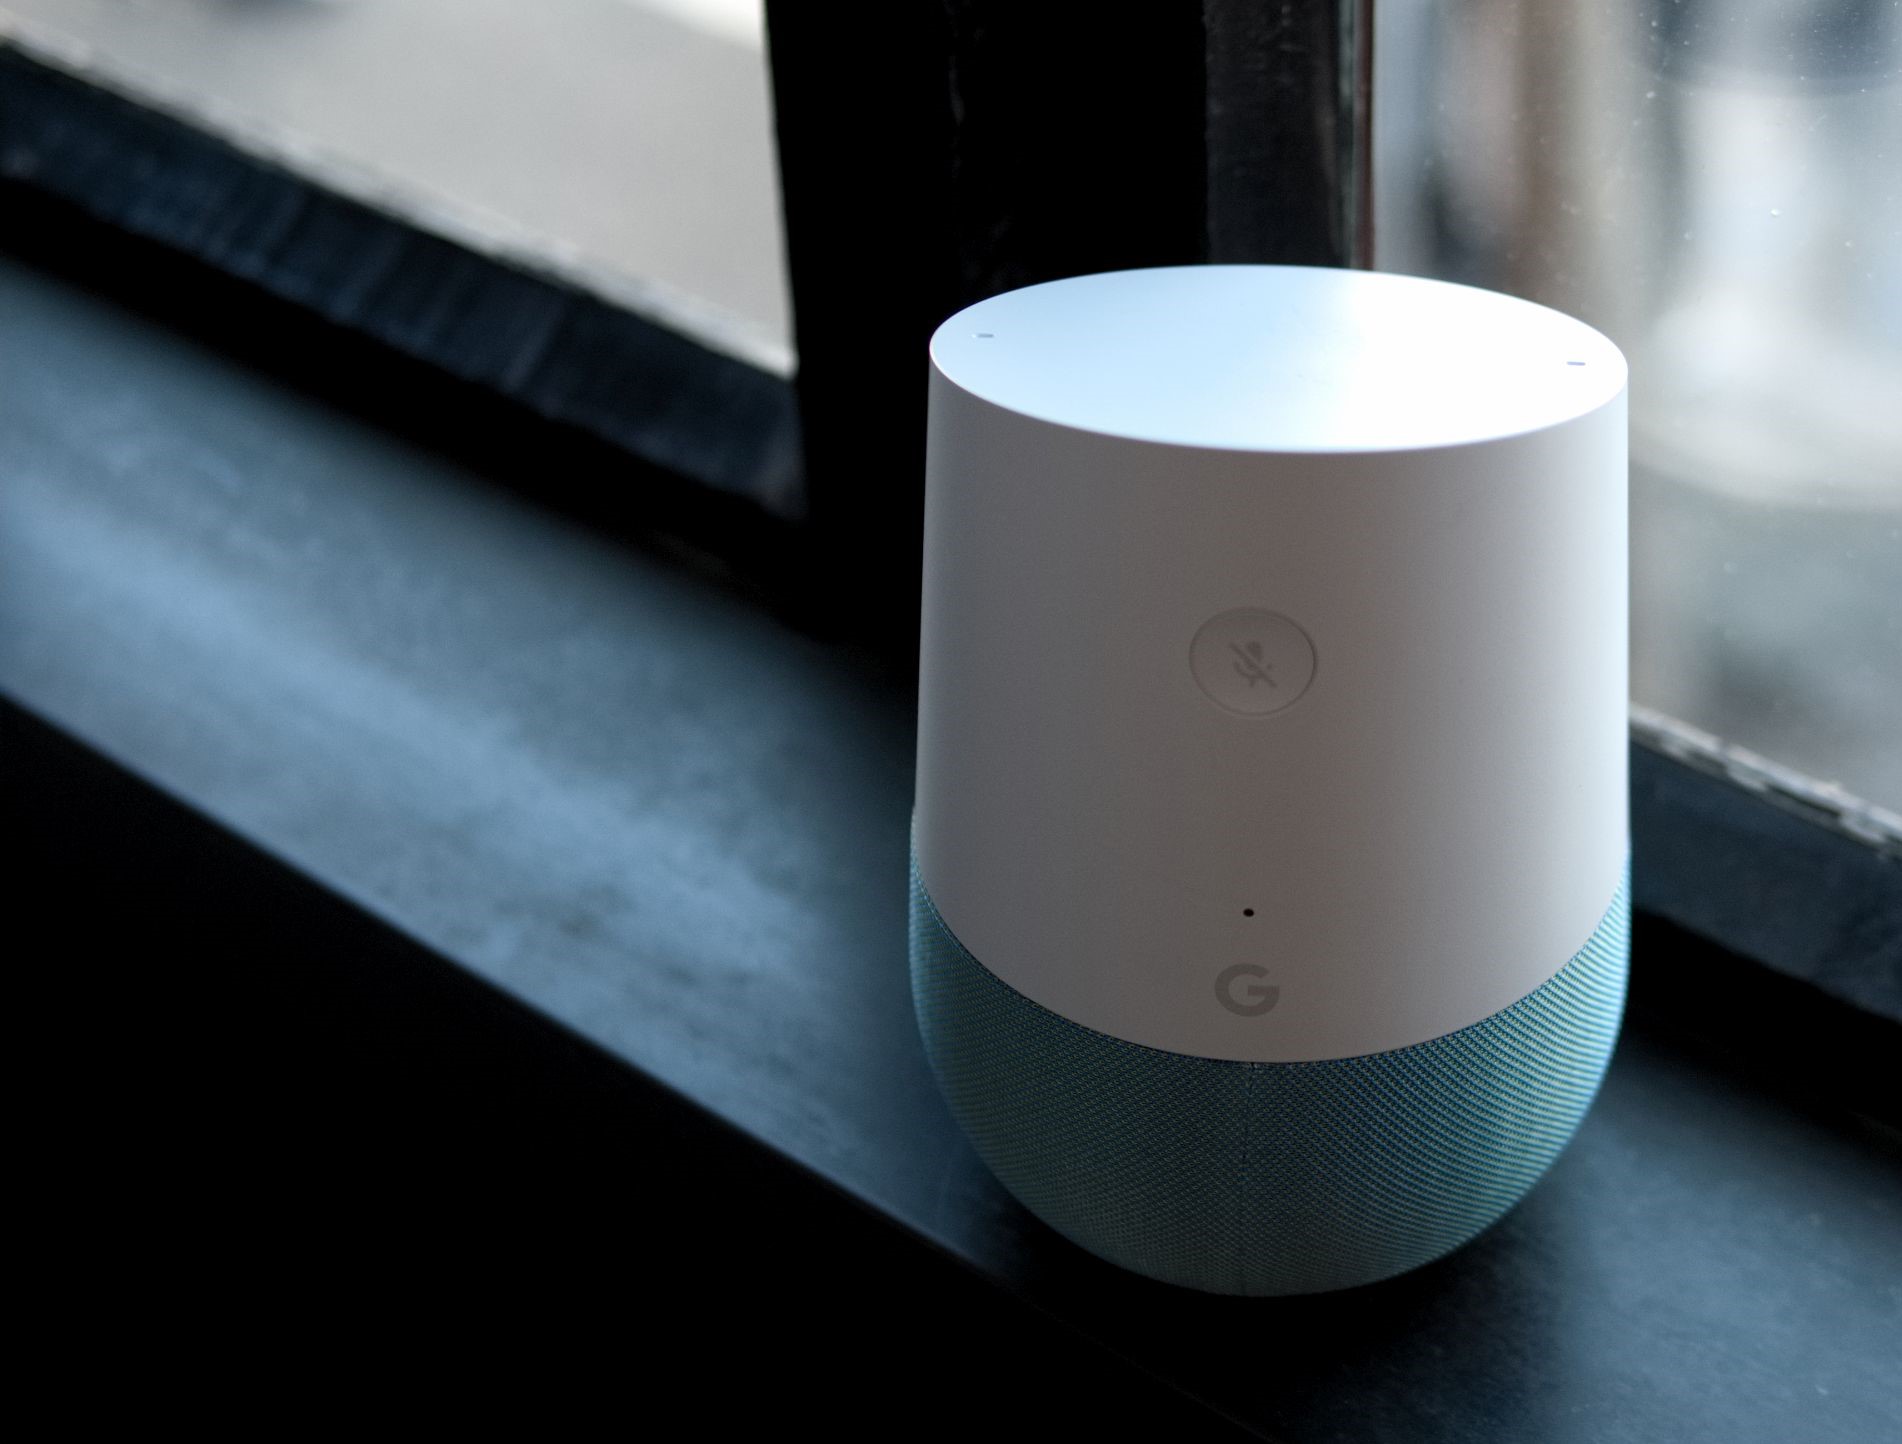 How To Find MAC Address On Google Home